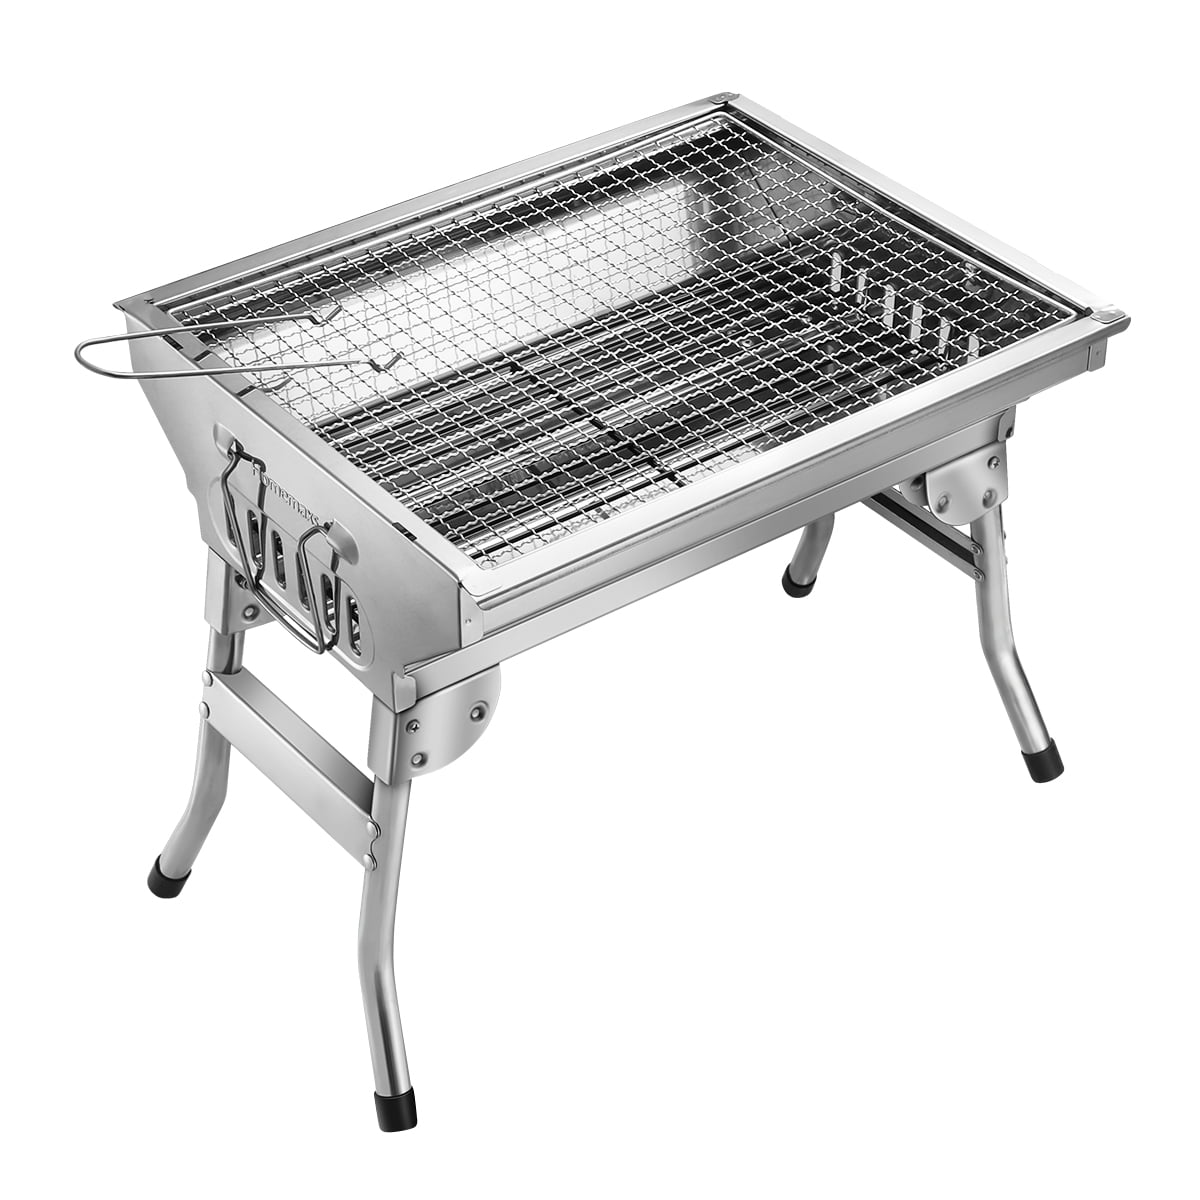 Picnic 28.7x13.18 inches Stainless Steel BBQ Charcoal Grill TORIBIO BBQ Grill Tailgating Backpacking Portable Folding Outdoor Barbecue Griddle Cooking Appliance for Camping Hiking